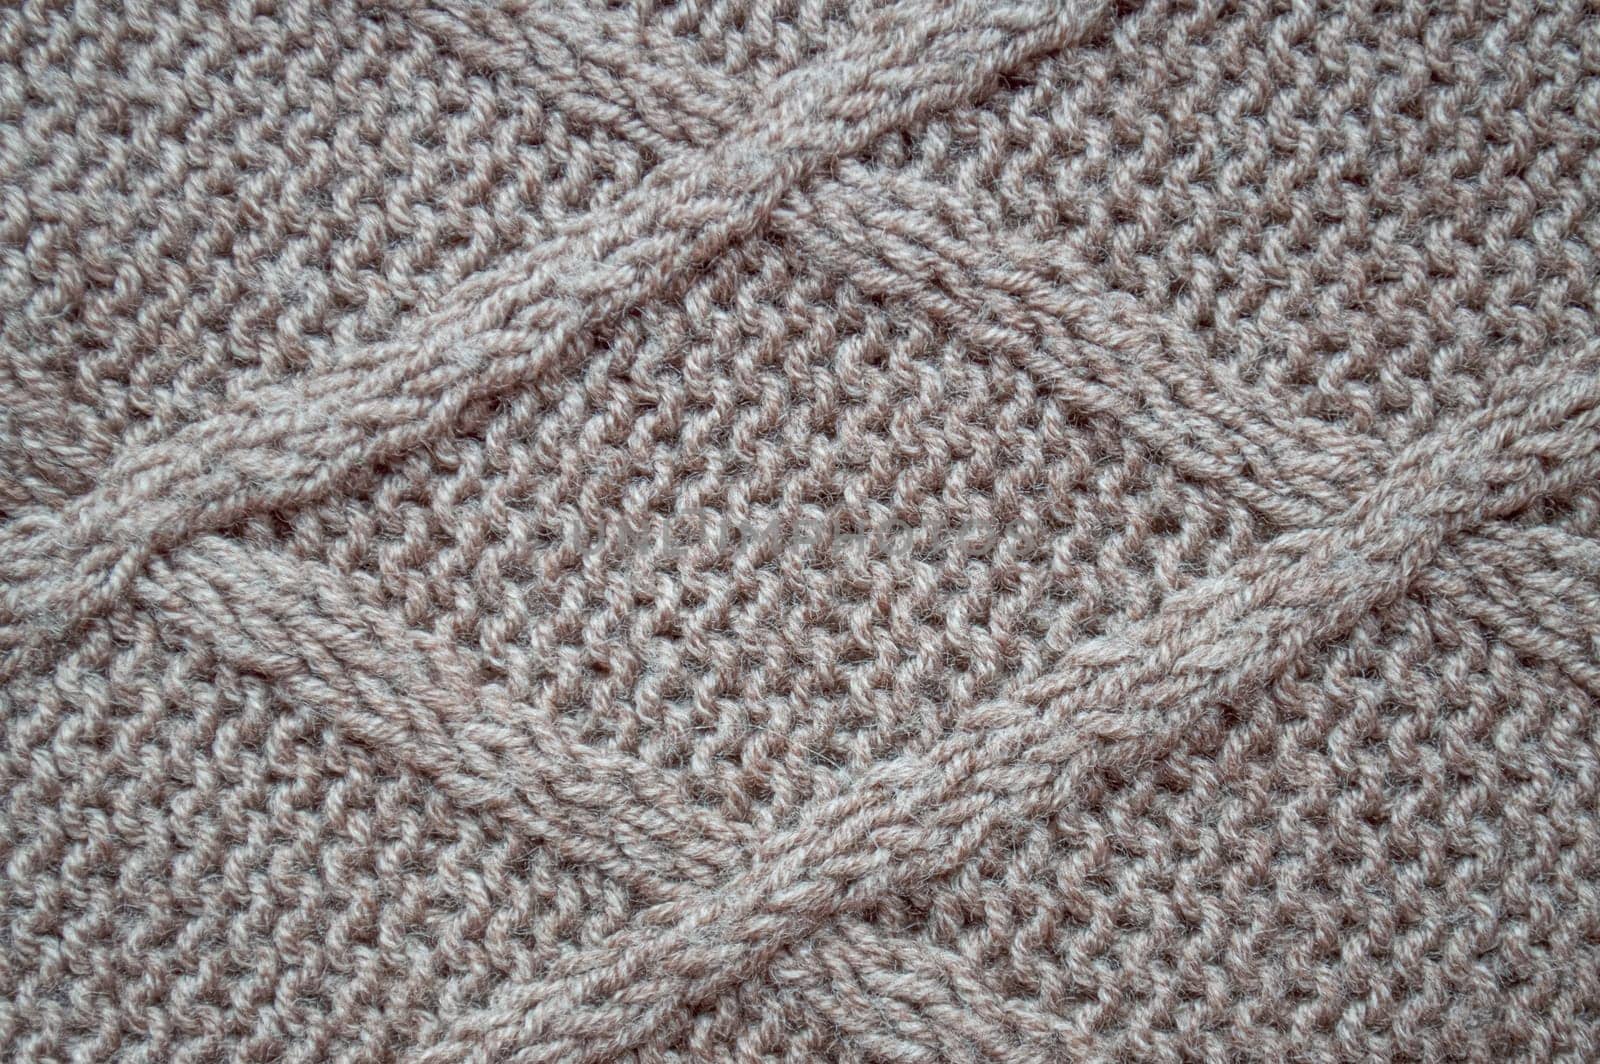 Knitted Texture. Organic Woven Textile. Knitwear Xmas Background. Detail Knitting Texture. Structure Thread. Nordic Christmas Blanket. Macro Jumper Embroidery. Soft Knitting Texture.